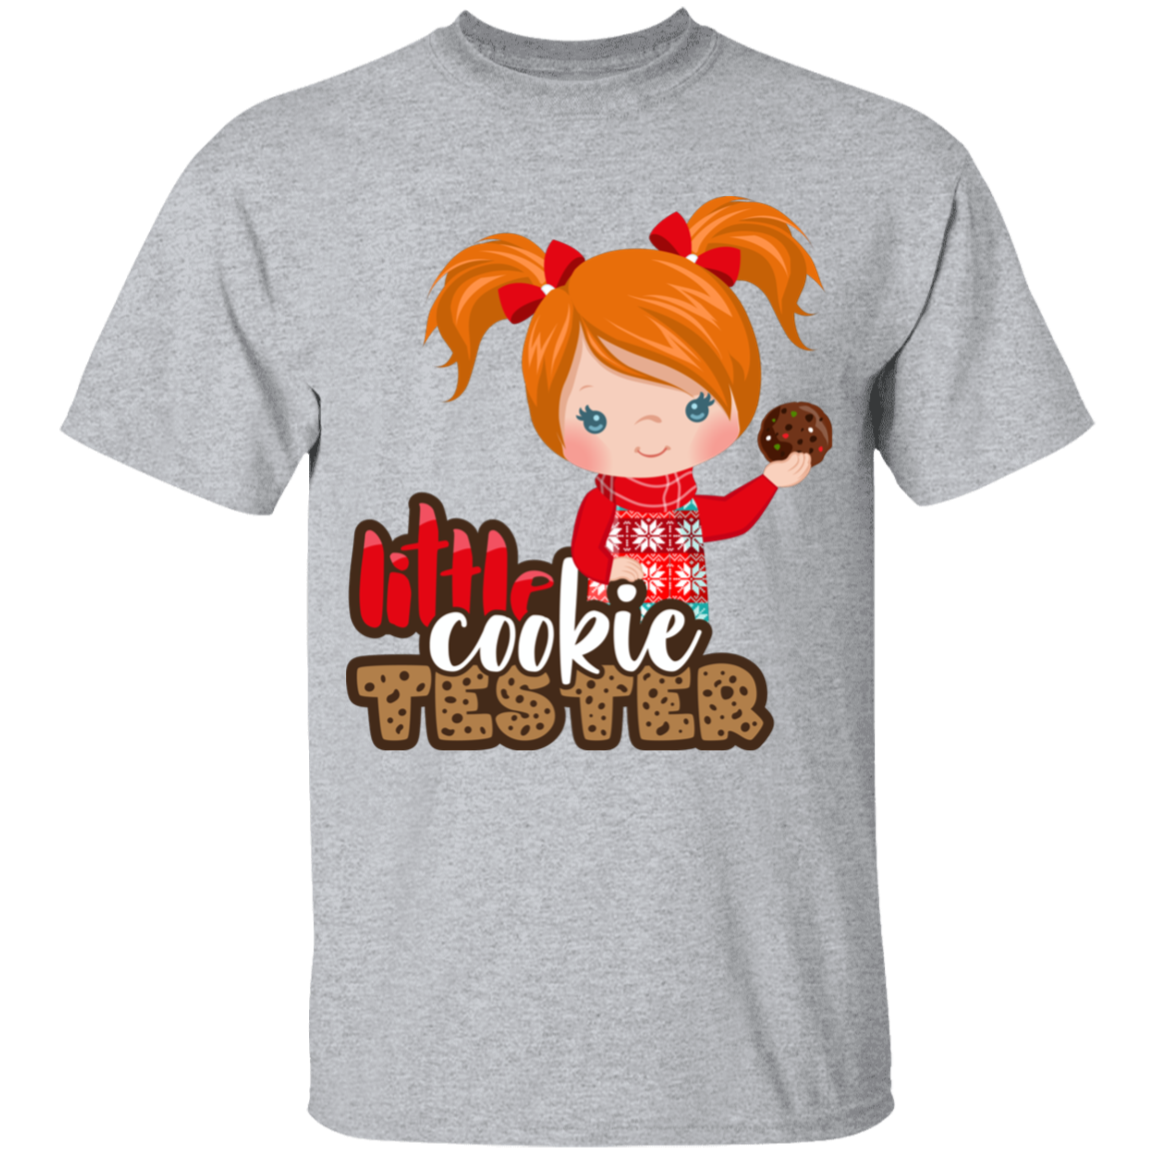 Little Cookie Tester Red Hair Girl 100% Cotton T-Shirt